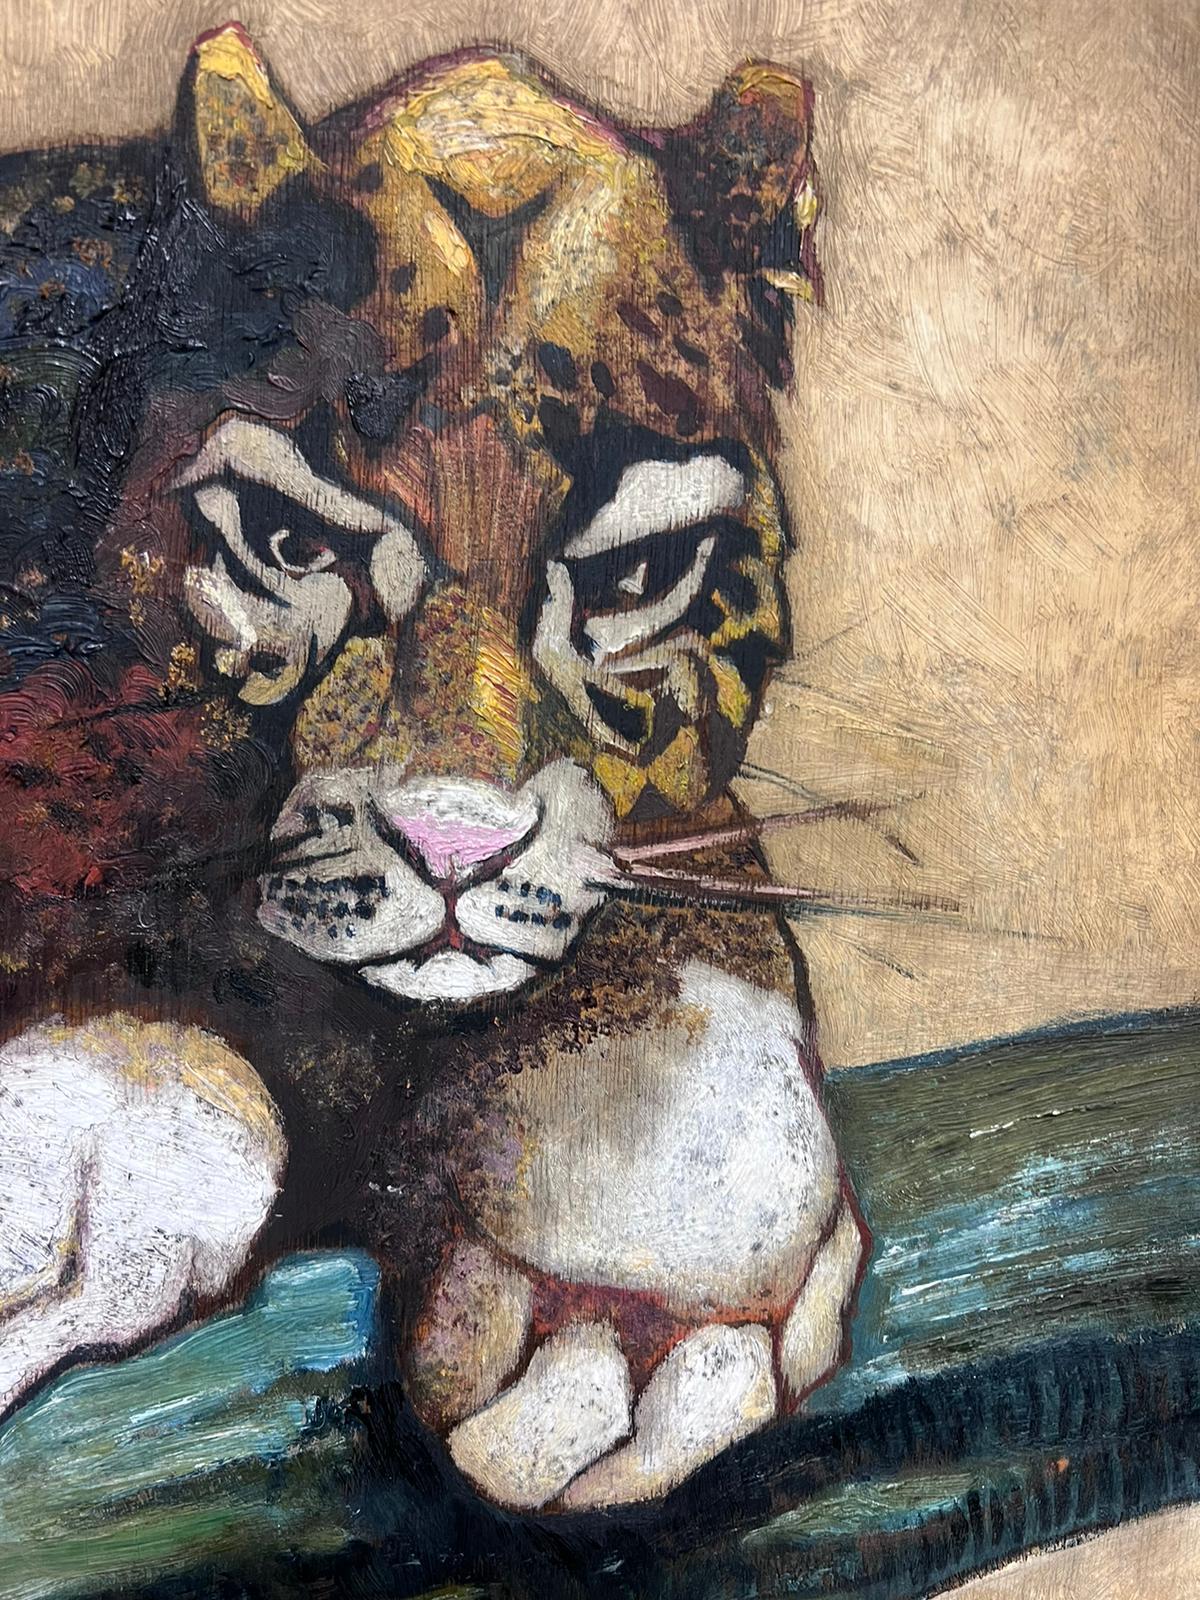 The Jaguar
French School, mid 20th century
indistinctly signed lower right corner
oil on wood panel, framed in deep wooden frame
framed: 30 x 43.5 inches
panel: 21.5 x 31.5 inches
provenance: private collection, France
condition: very good and sound